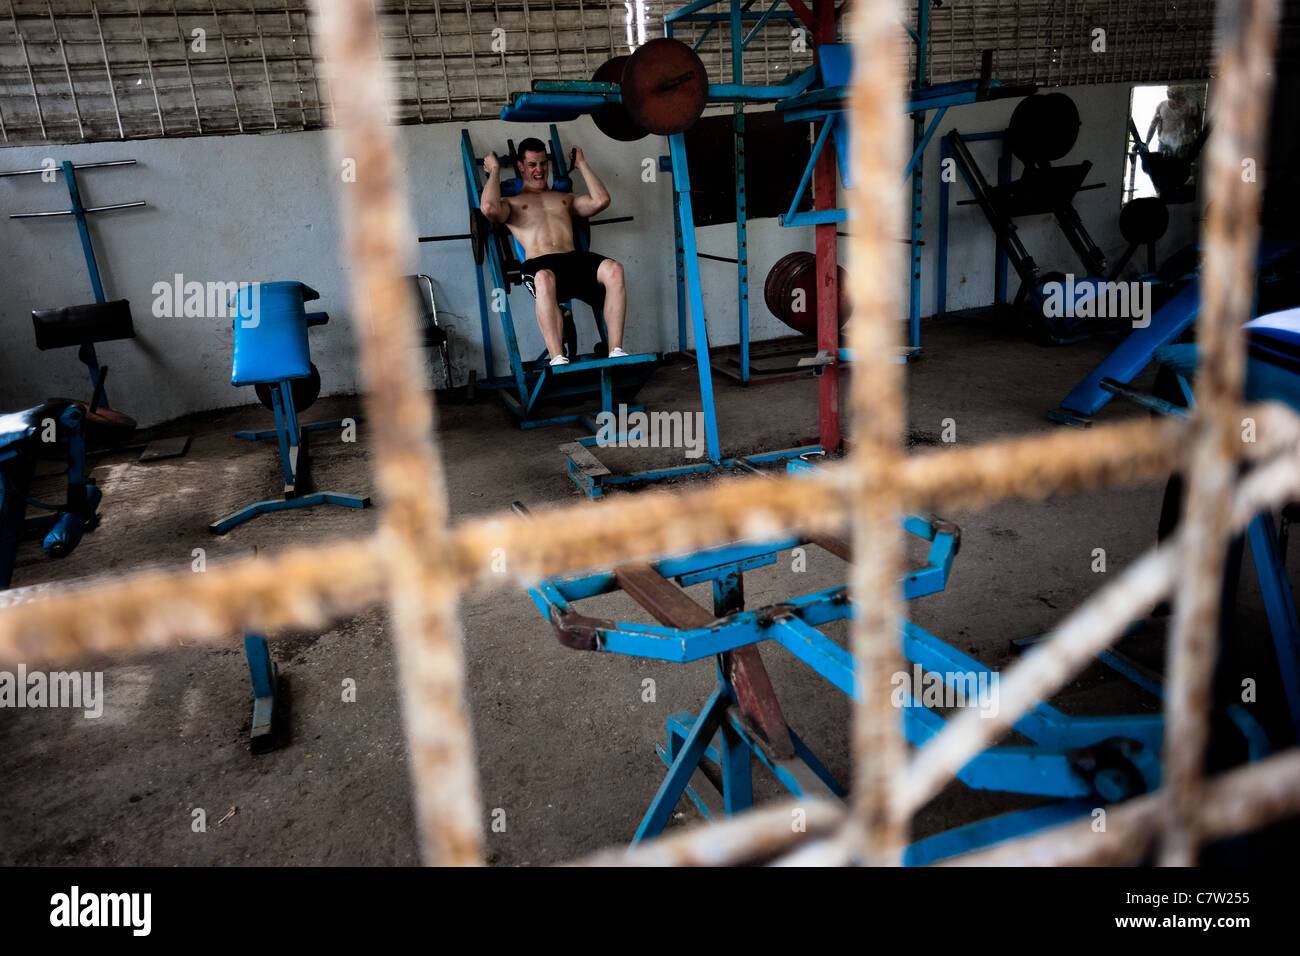 A young Cuban man trains at a bodybuilding gym in Alamar, a public housing complex in the Eastern Havana, Cuba. Stock Photo